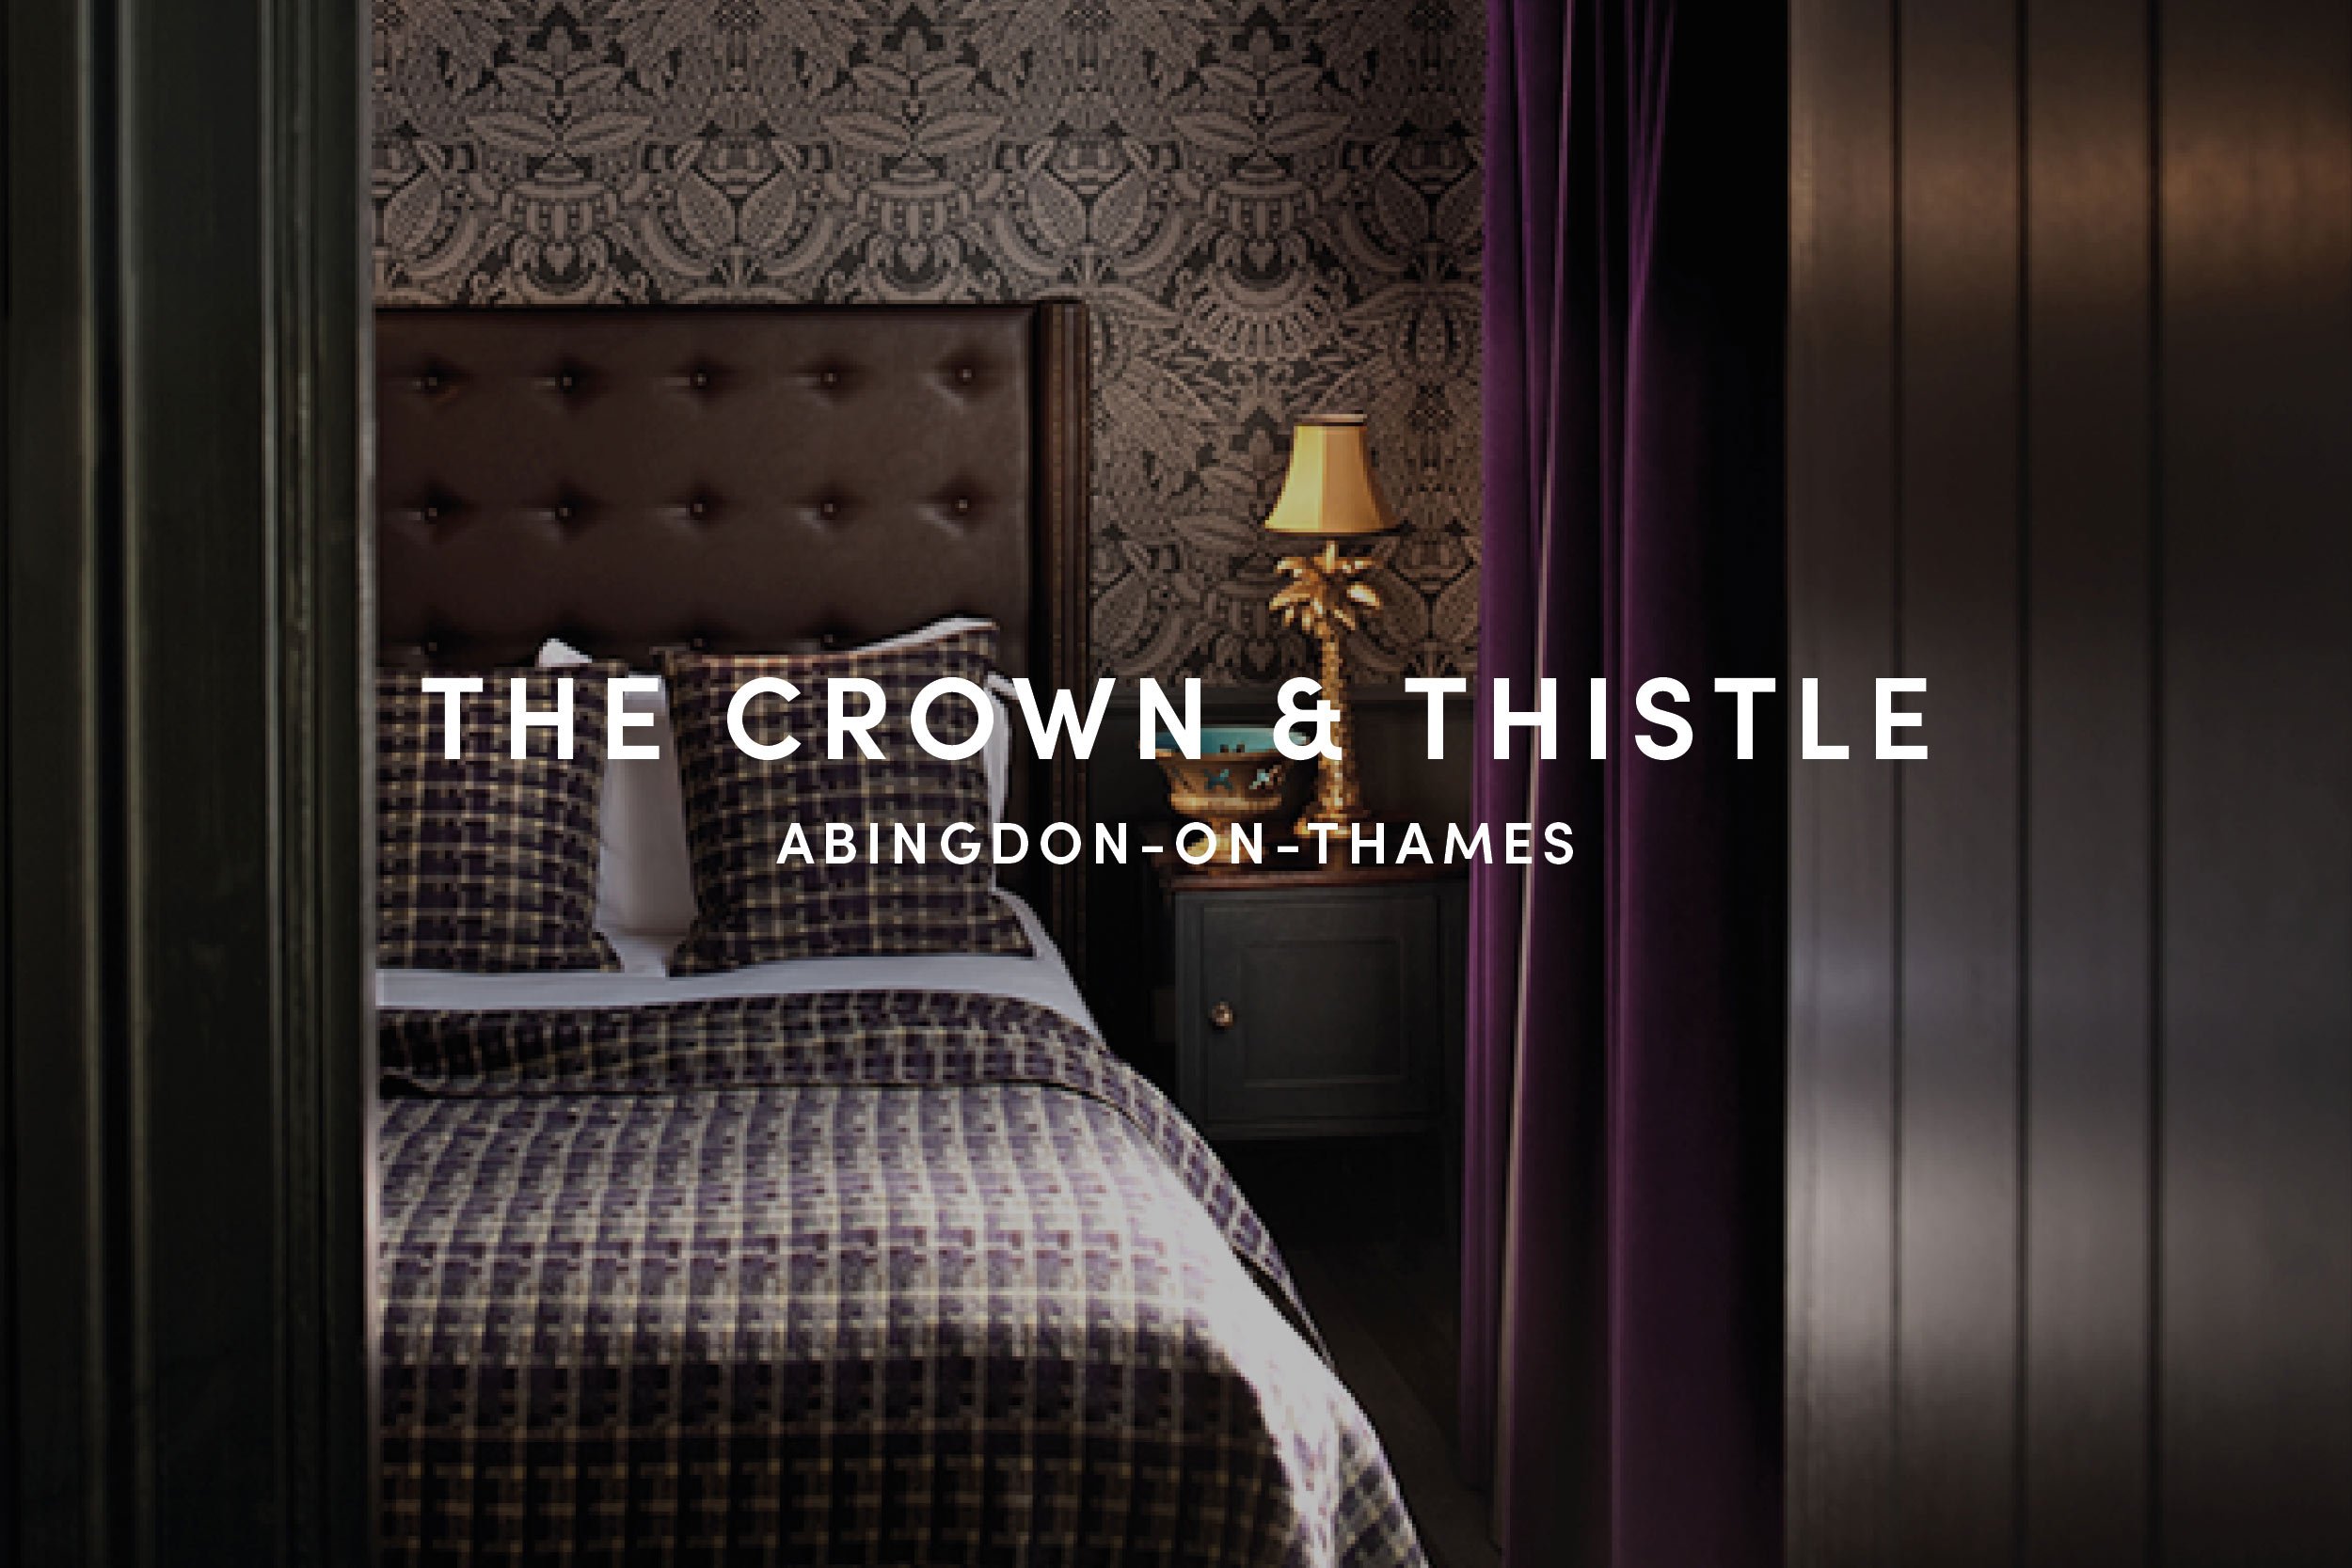 The-Crown-&-Thistle-Hotel-in-Abingdon-on-Thames-Oxfordshire.jpg